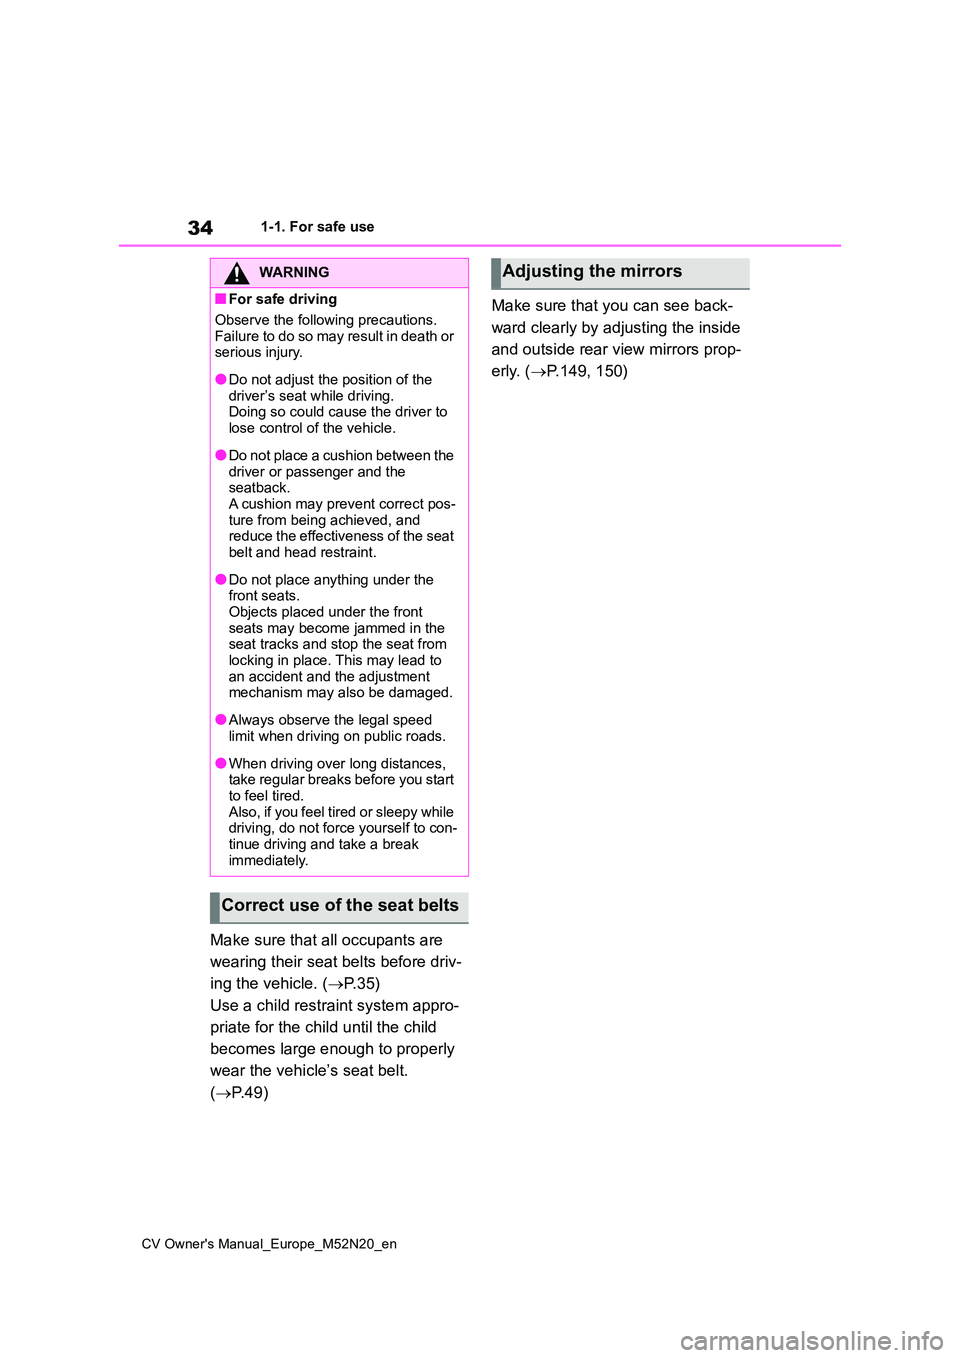 TOYOTA YARIS CROSS 2022  Owners Manual 34
CV Owner's Manual_Europe_M52N20_en
1-1. For safe use
Make sure that all occupants are  
wearing their seat belts before driv- 
ing the vehicle. ( P.35) 
Use a child restraint system appro- 
